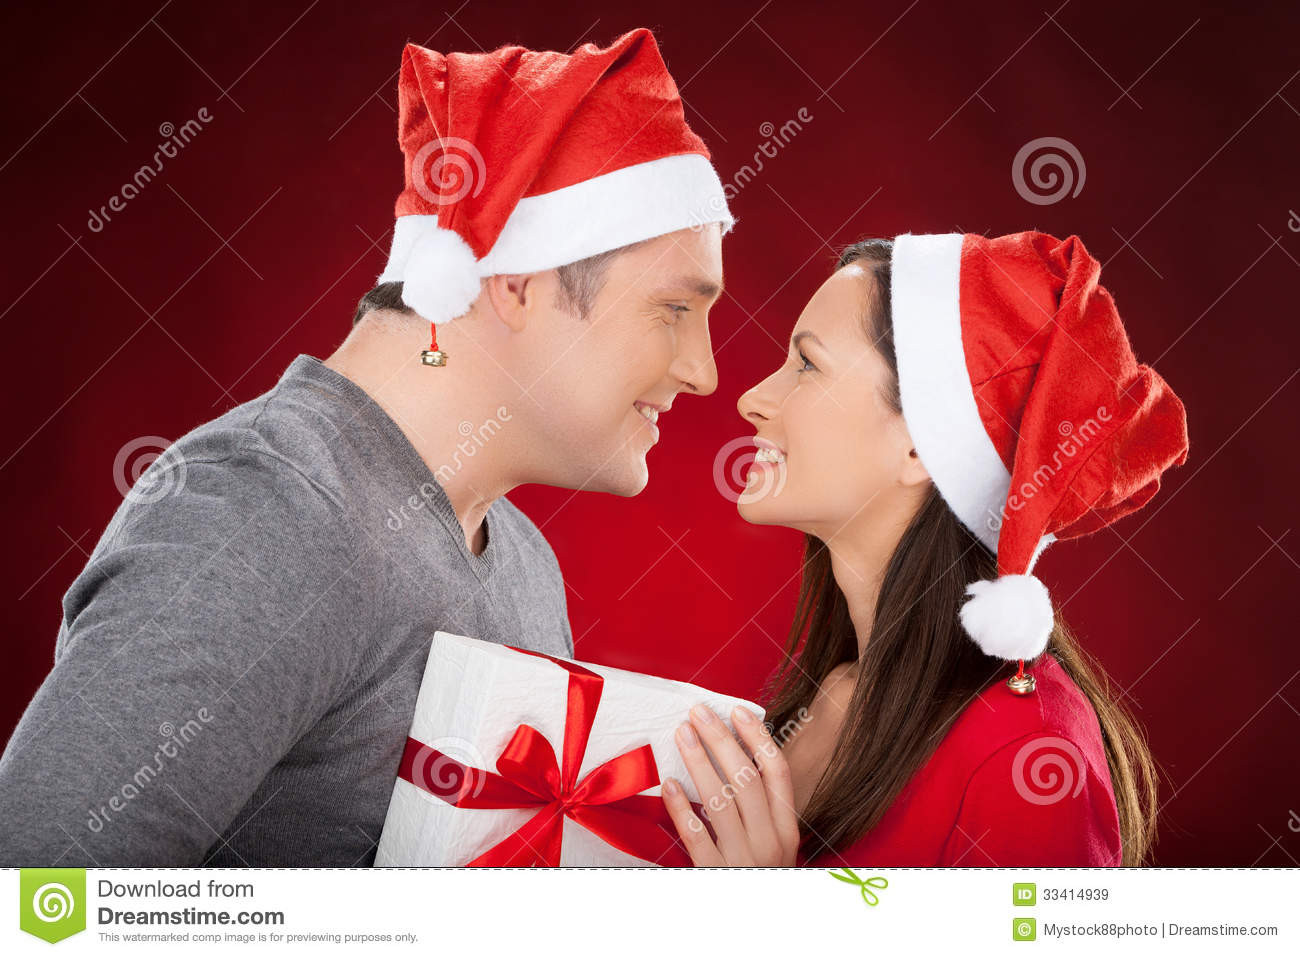 Christmas Gift Ideas Young Couple
 To her At Christmas Eve Royalty Free Stock